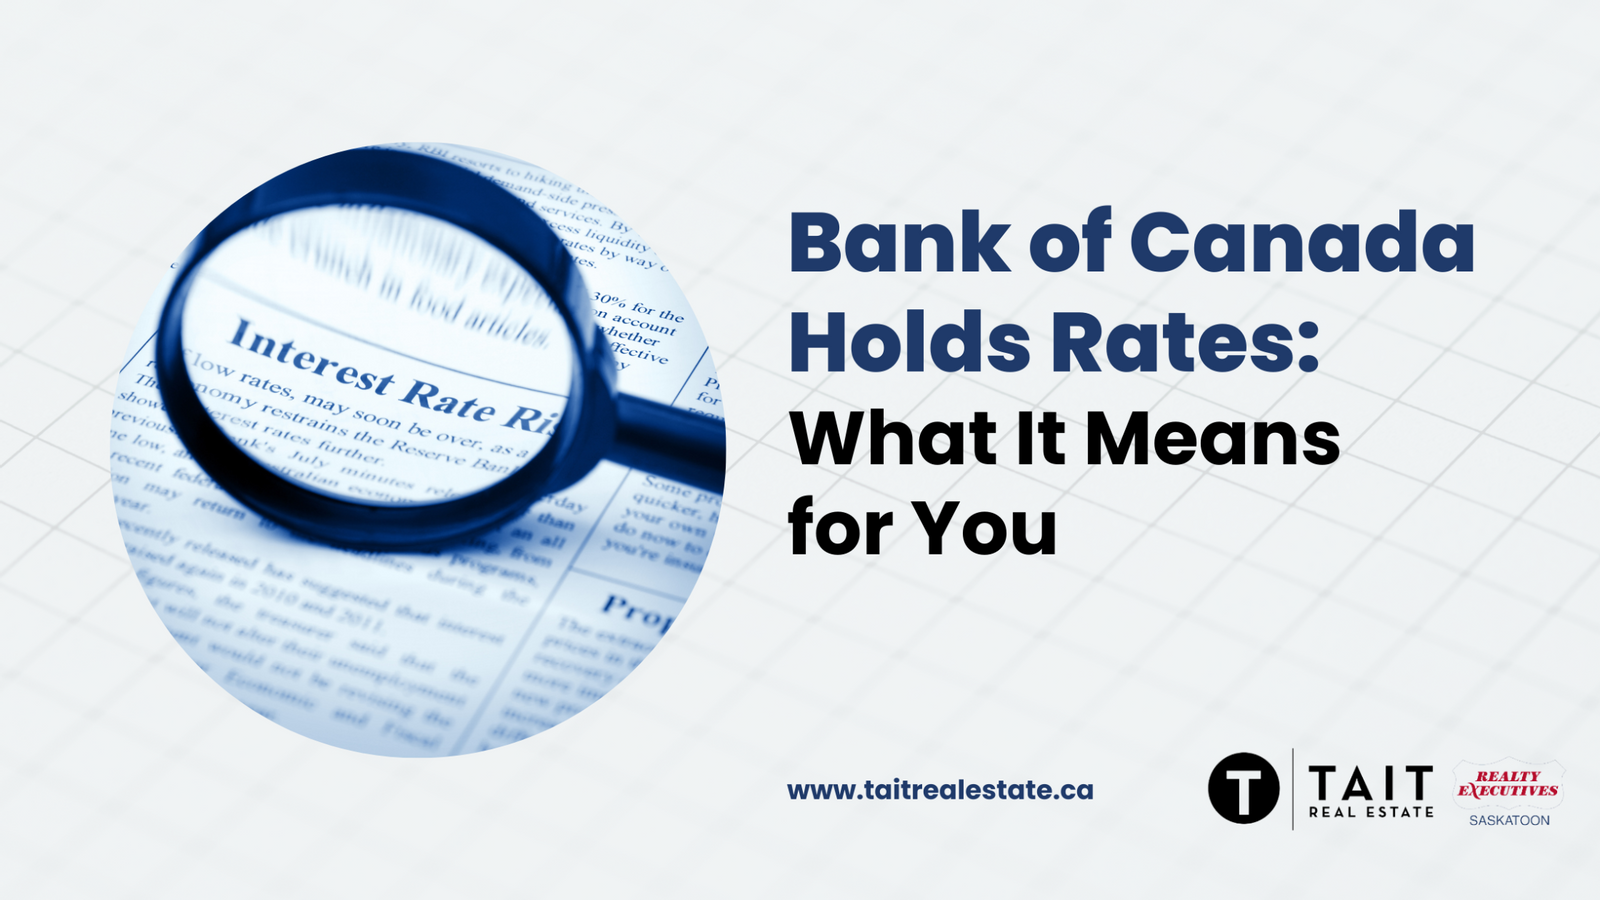 Bank of Canada Holds Rates: What It Means for You